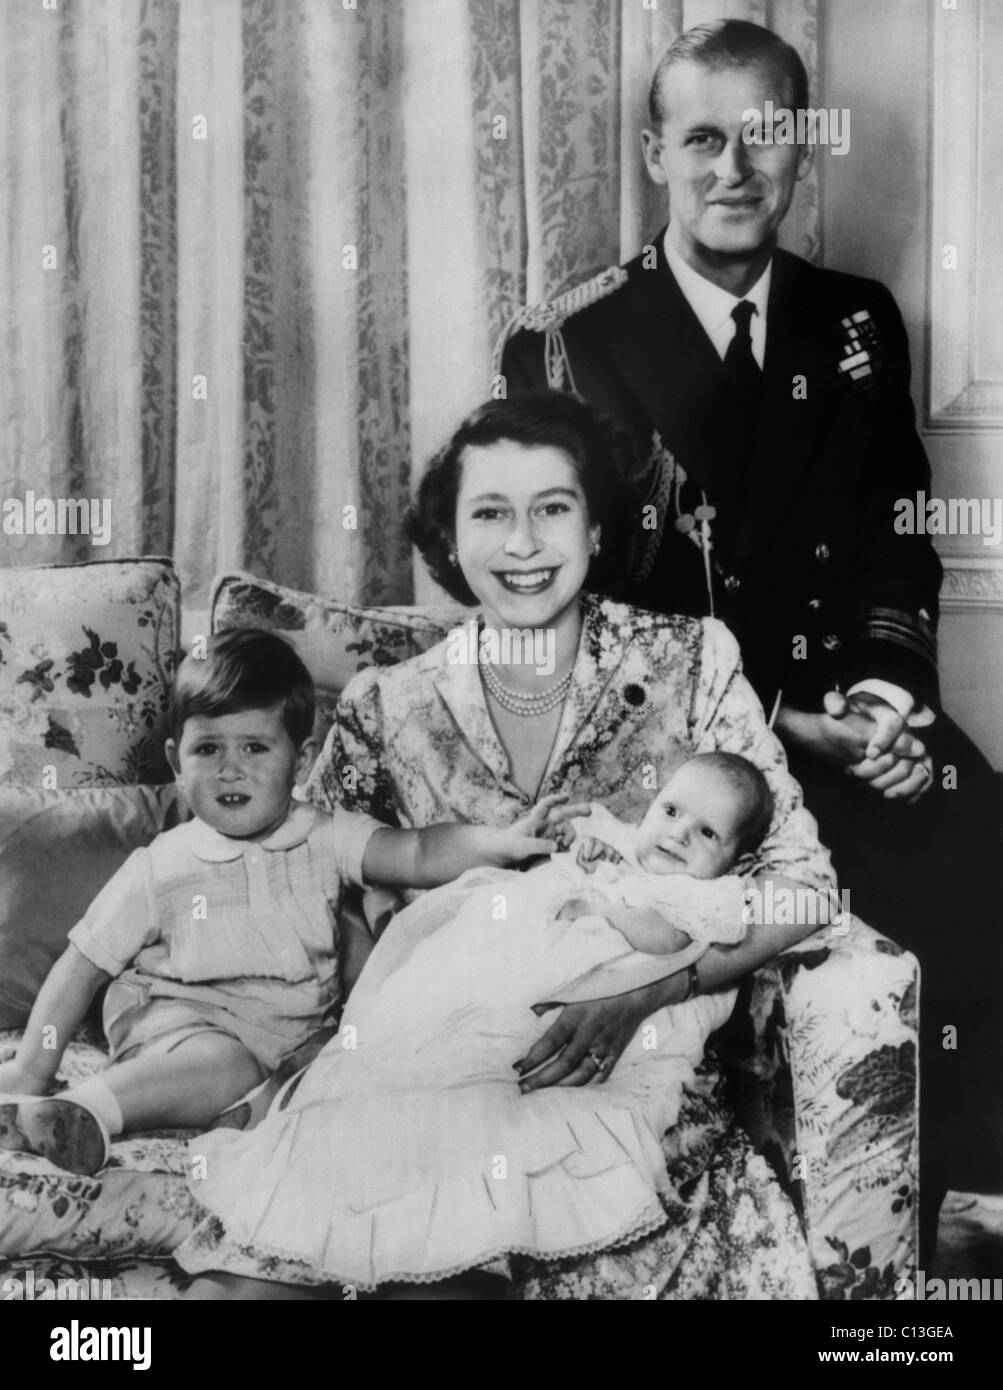 British Royal Family. From left: future Prince of Wales Prince Charles, future Queen of England Princess Elizabeth, future Princess Royal of England Princess Anne, Prince Philip, Duke of Edinburgh, London, England, 1951. Stock Photo